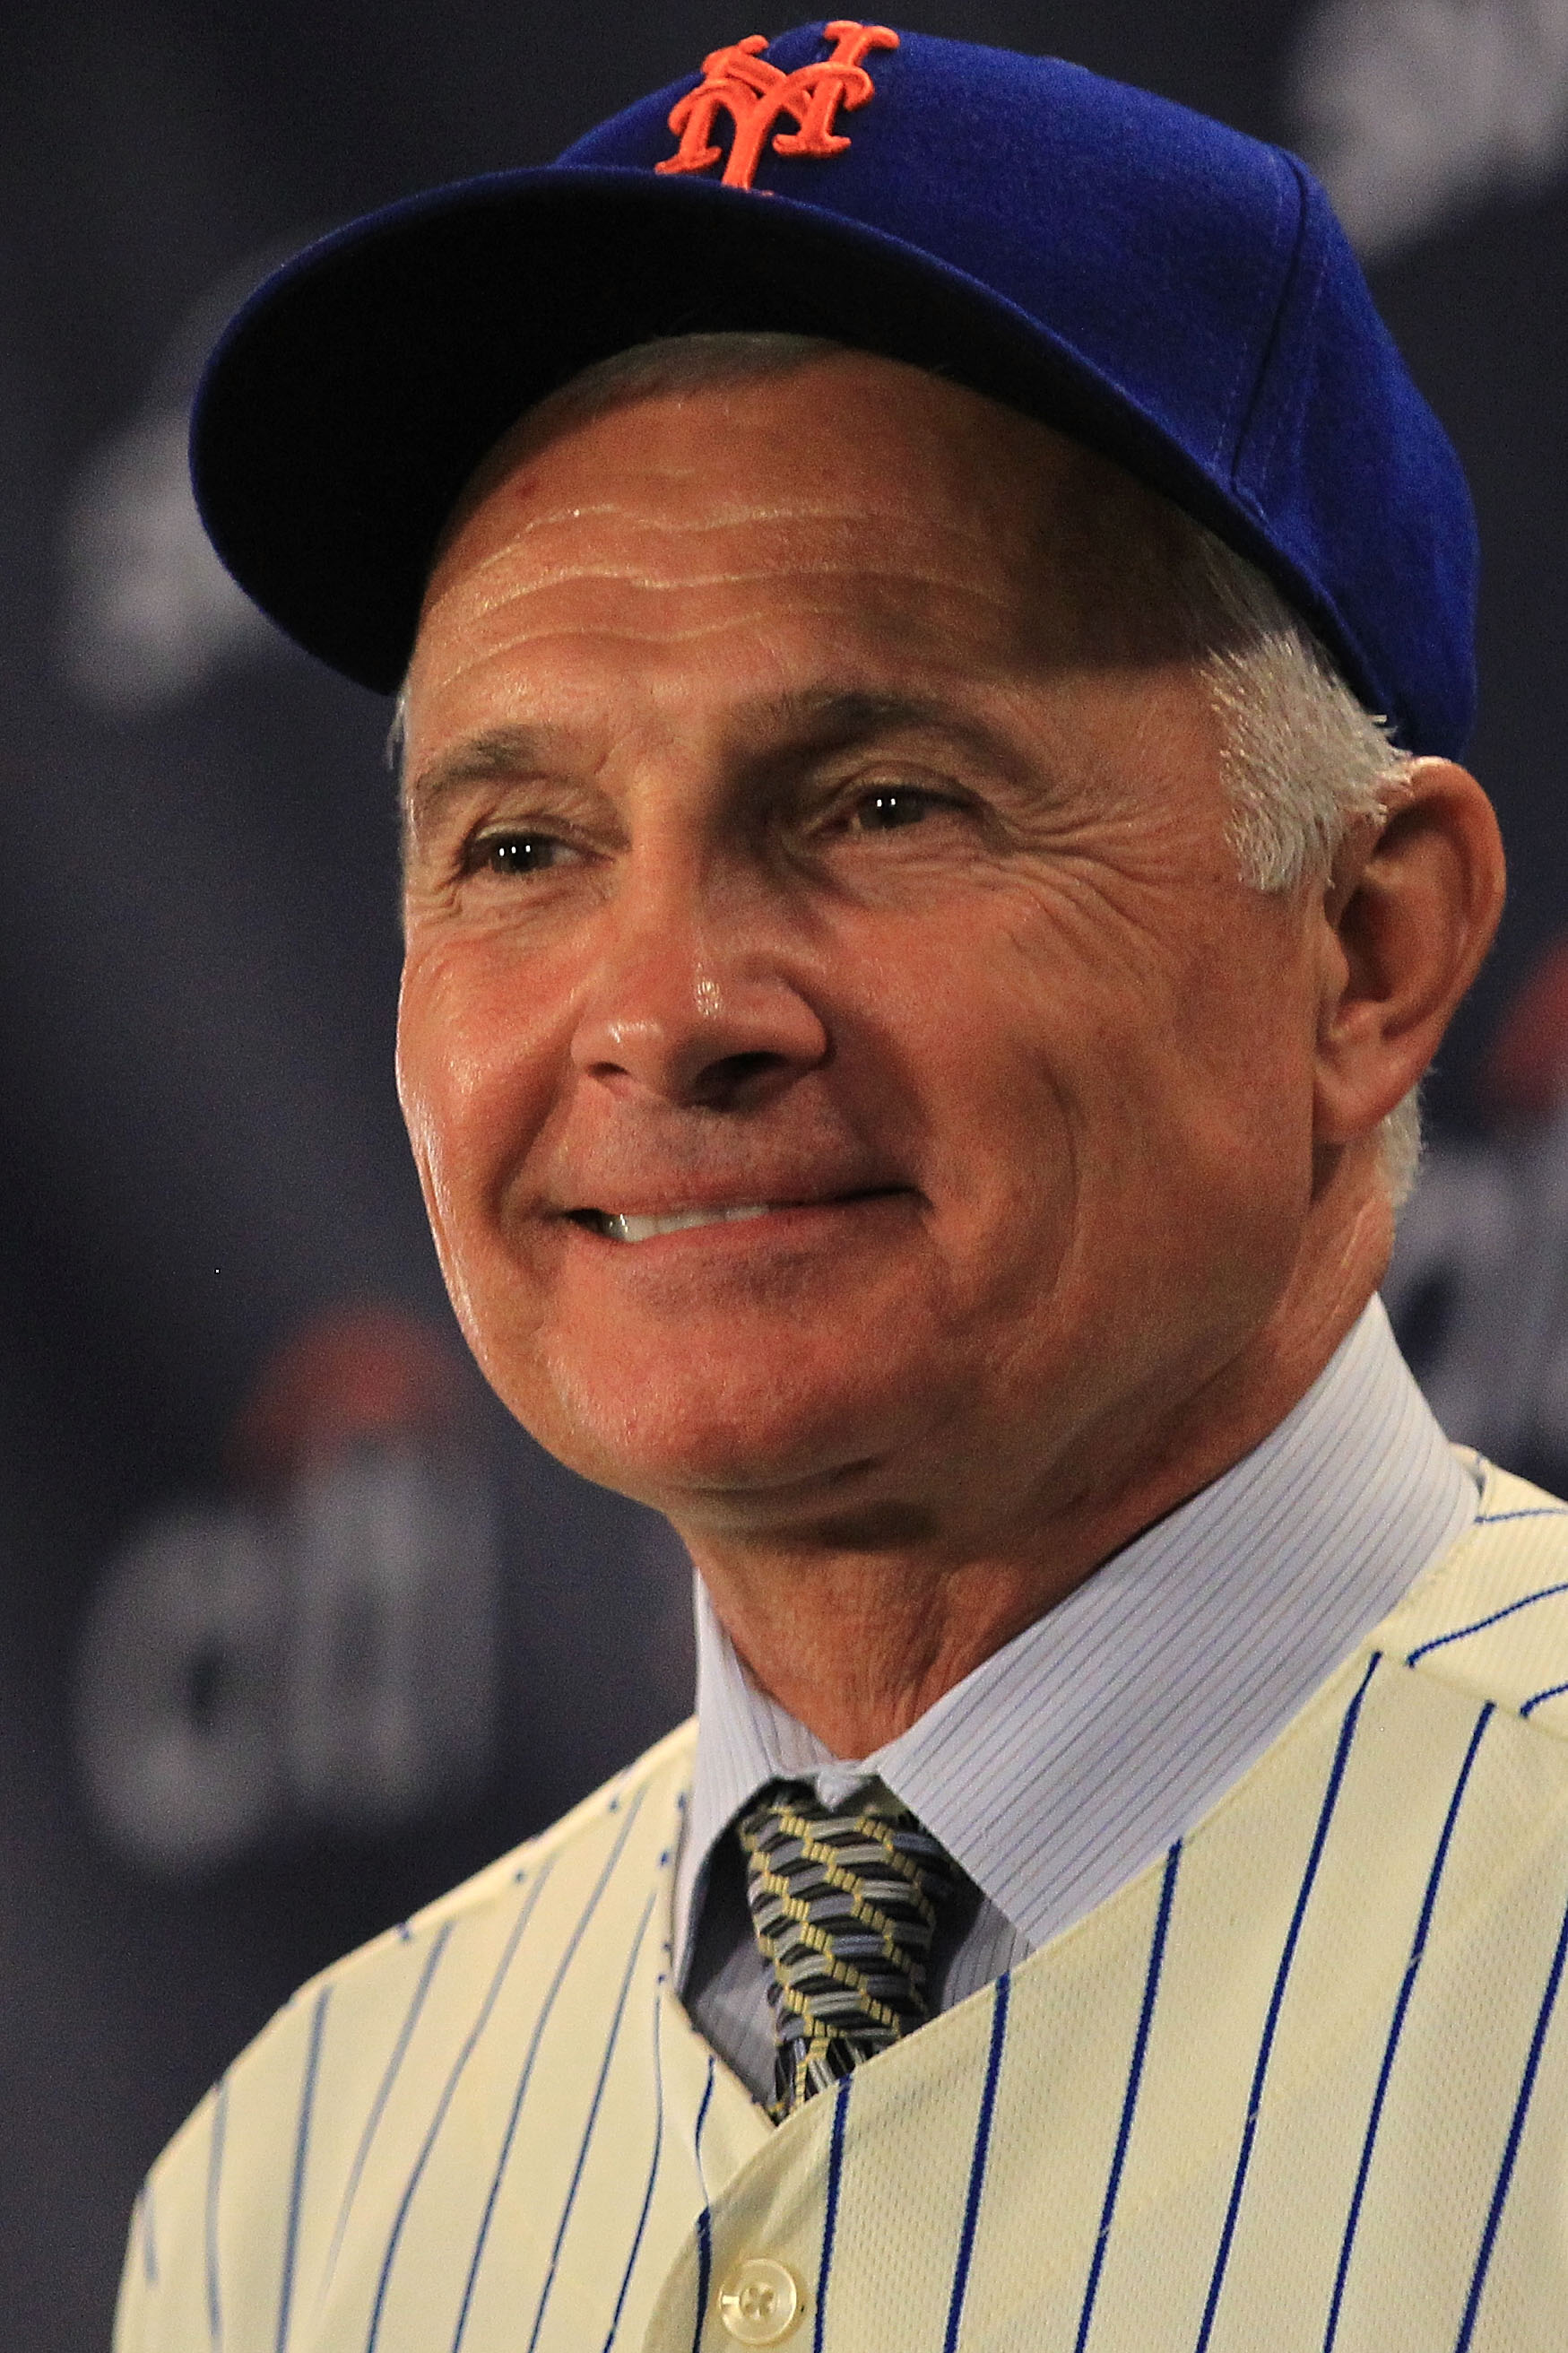 NEW YORK - NOVEMBER 23:  New York Mets new manager Terry Collins speaks to the media during a press conference  at Citi Field on November 23, 2010 in the Flushing neighborhood, of the Queens borough of New York City.  (Photo by Chris McGrath/Getty Images)